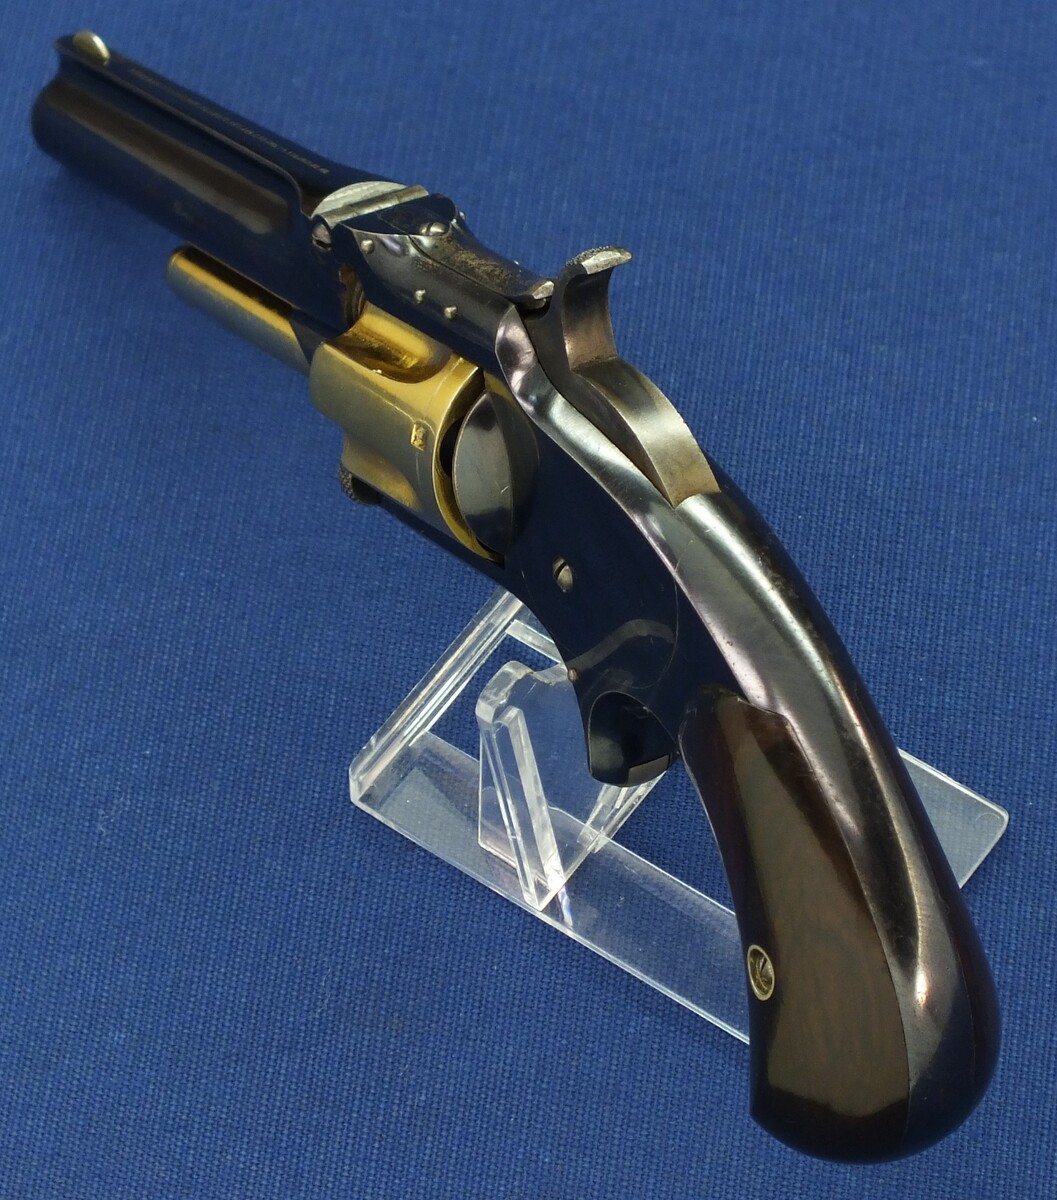 A fine antique 19th century American Smith & Wesson Revolver, Model No. 1-1/2 Second Issue. .32 Rimfire caliber, 5 shot fluted gilded cylinder. 3 1/2 inch barrel. In mint condition. Price 1.750 euro.